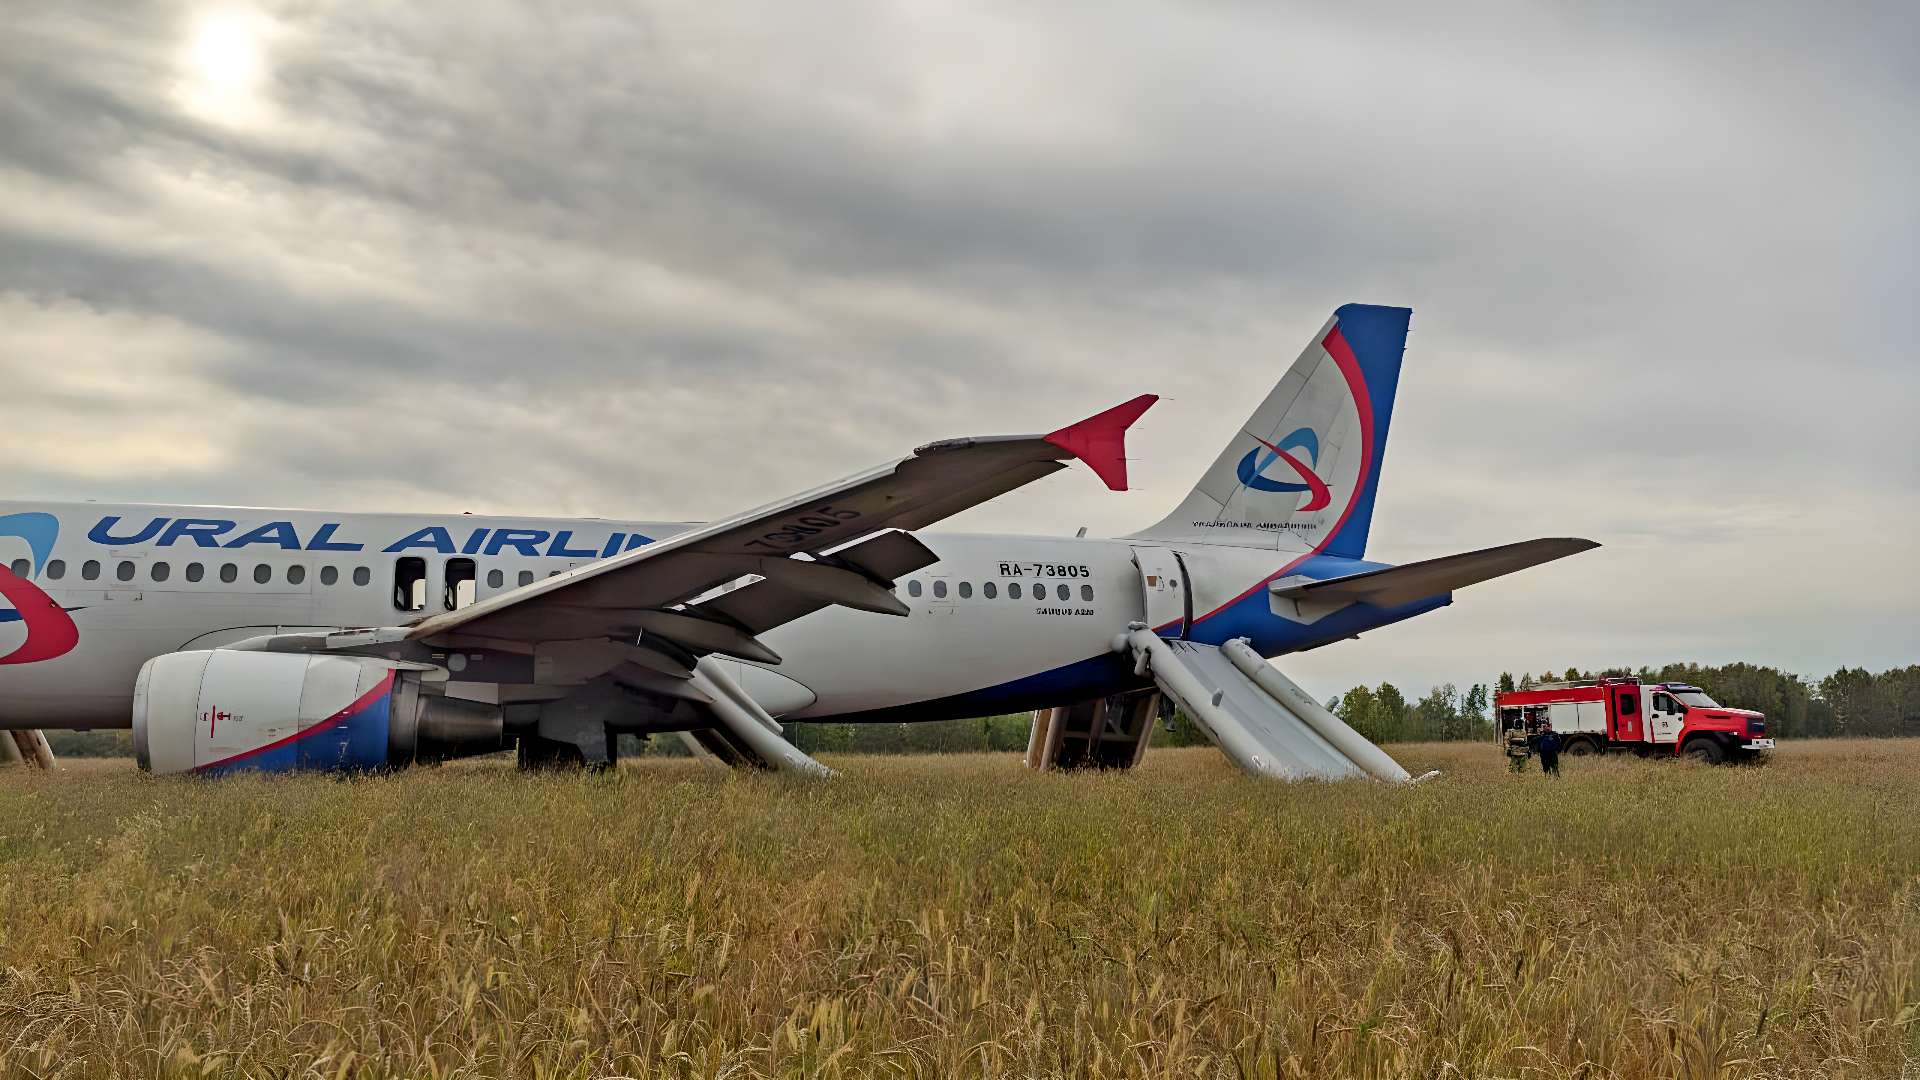 Update: Ural Airlines Plans To Fly A320 Out Of Field!